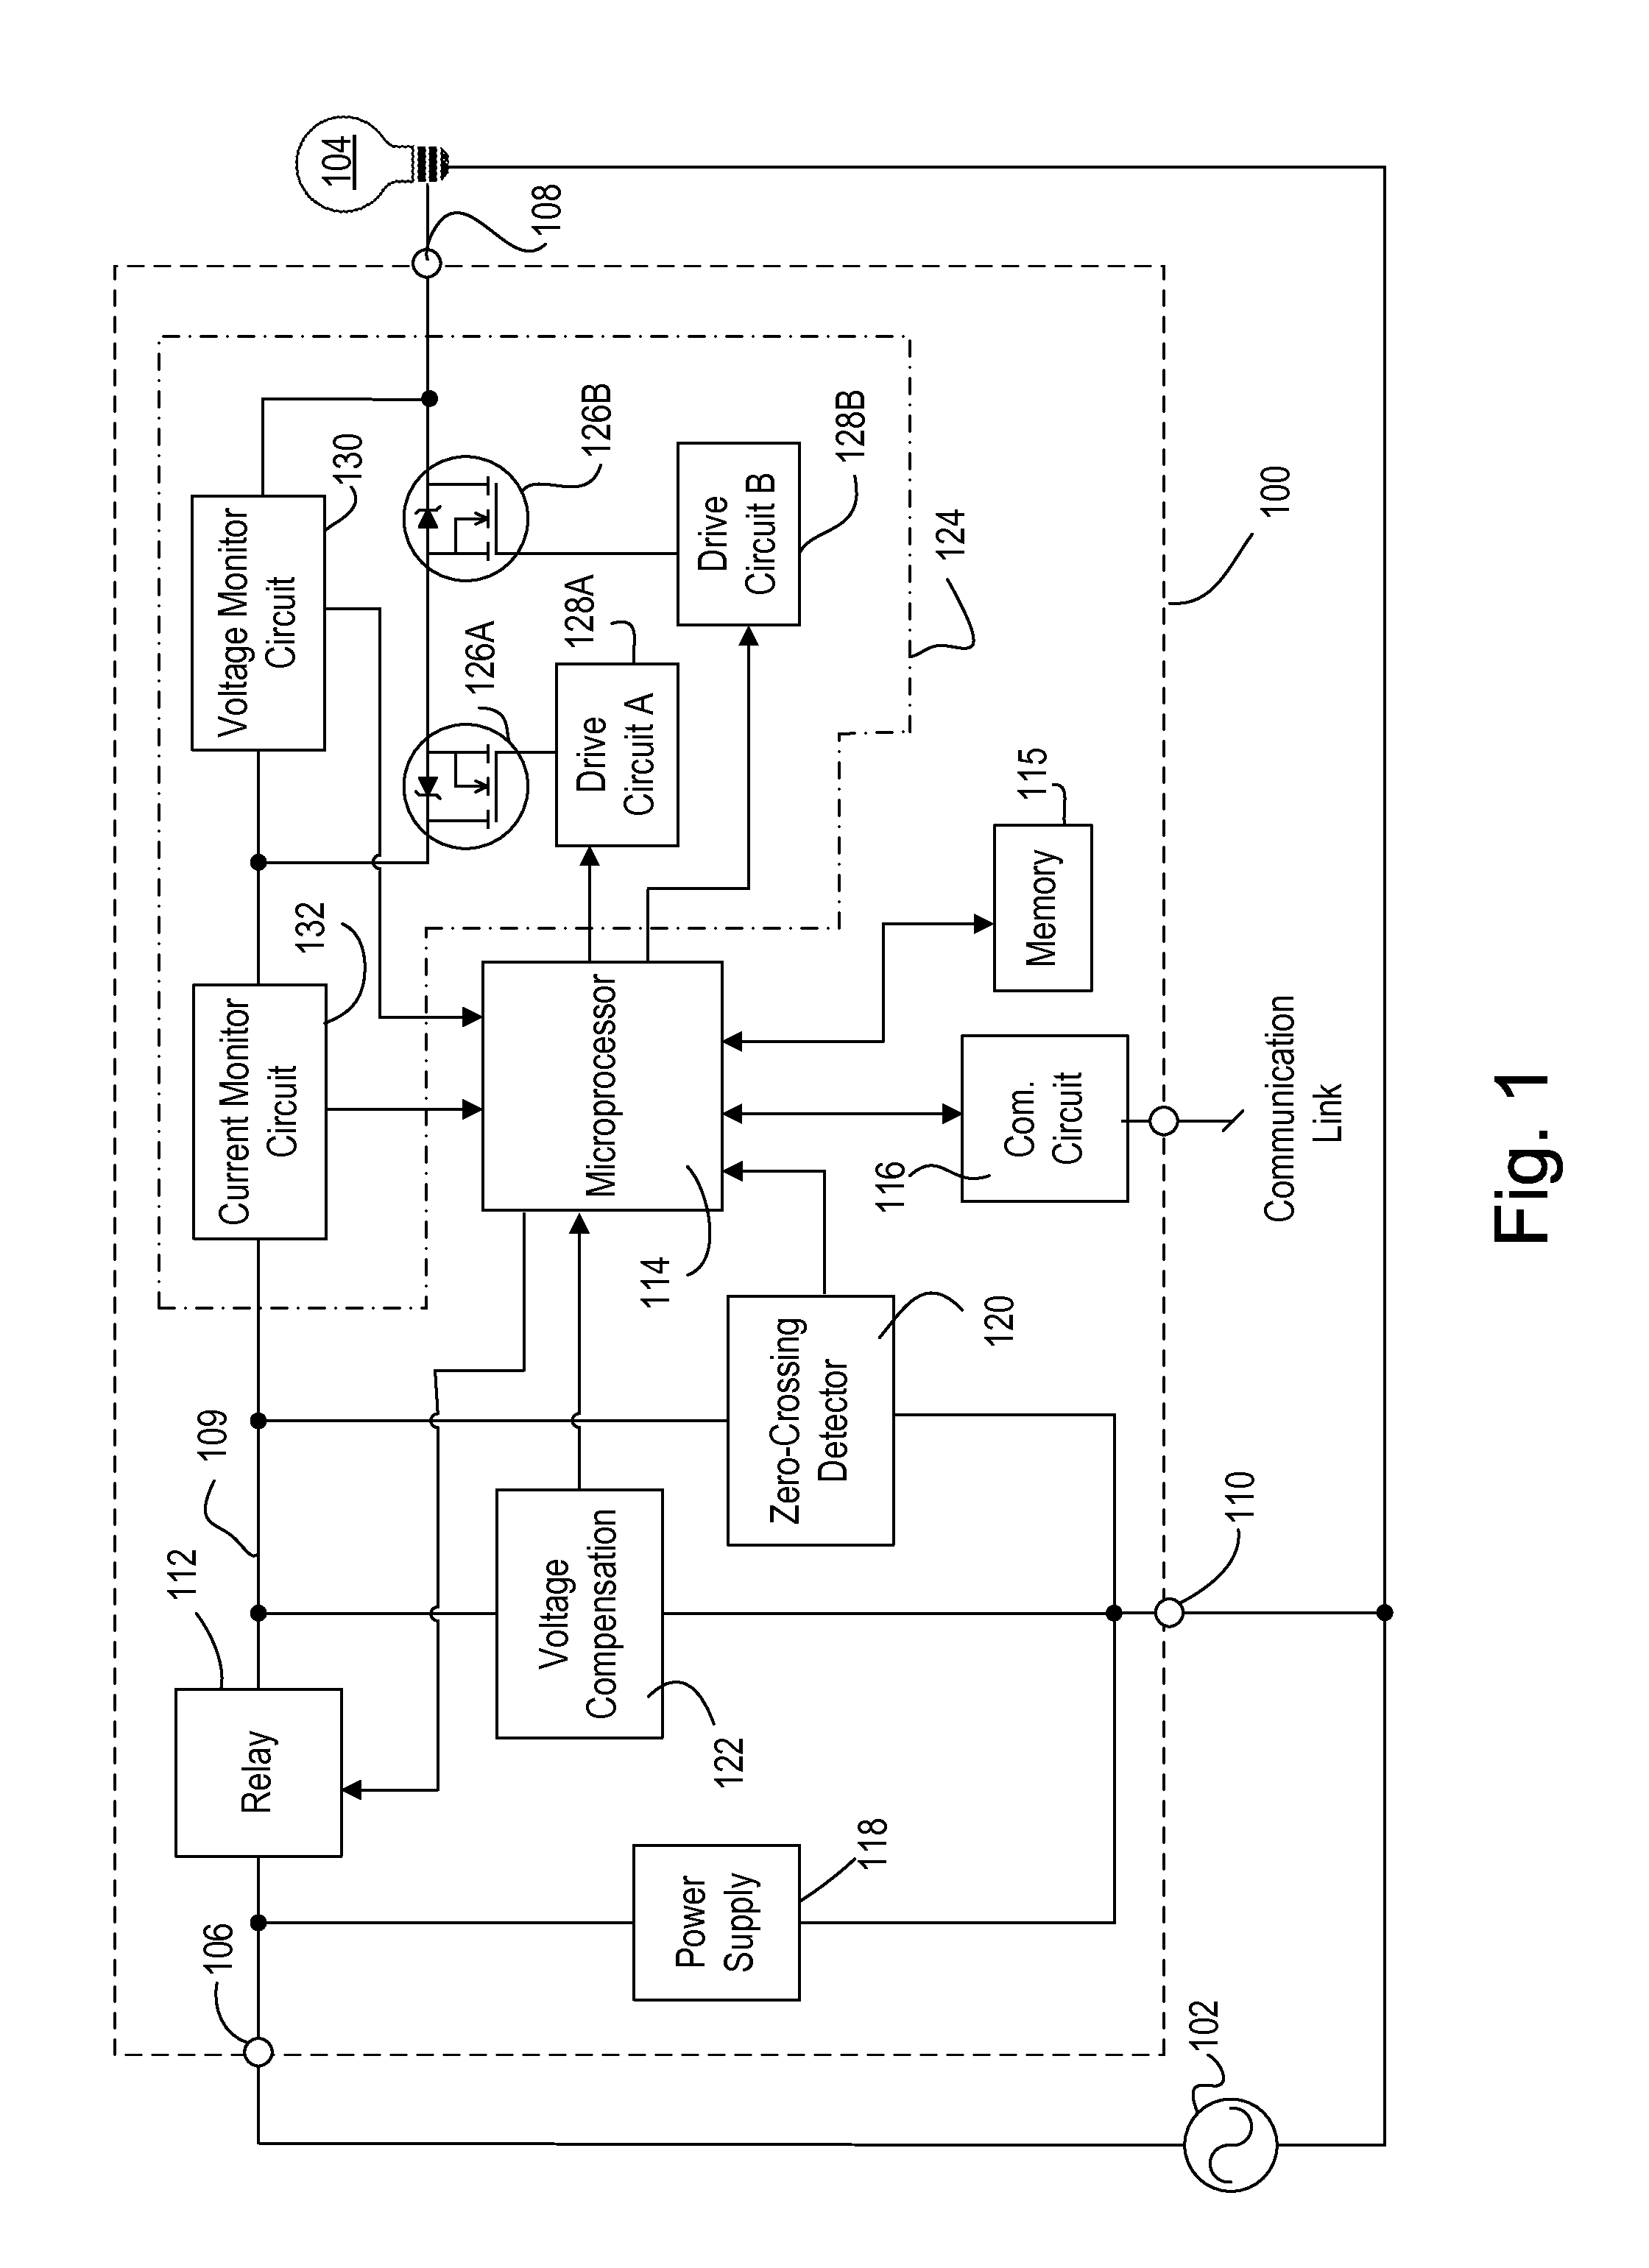 Method And Apparatus For Phase-Controlling A Load